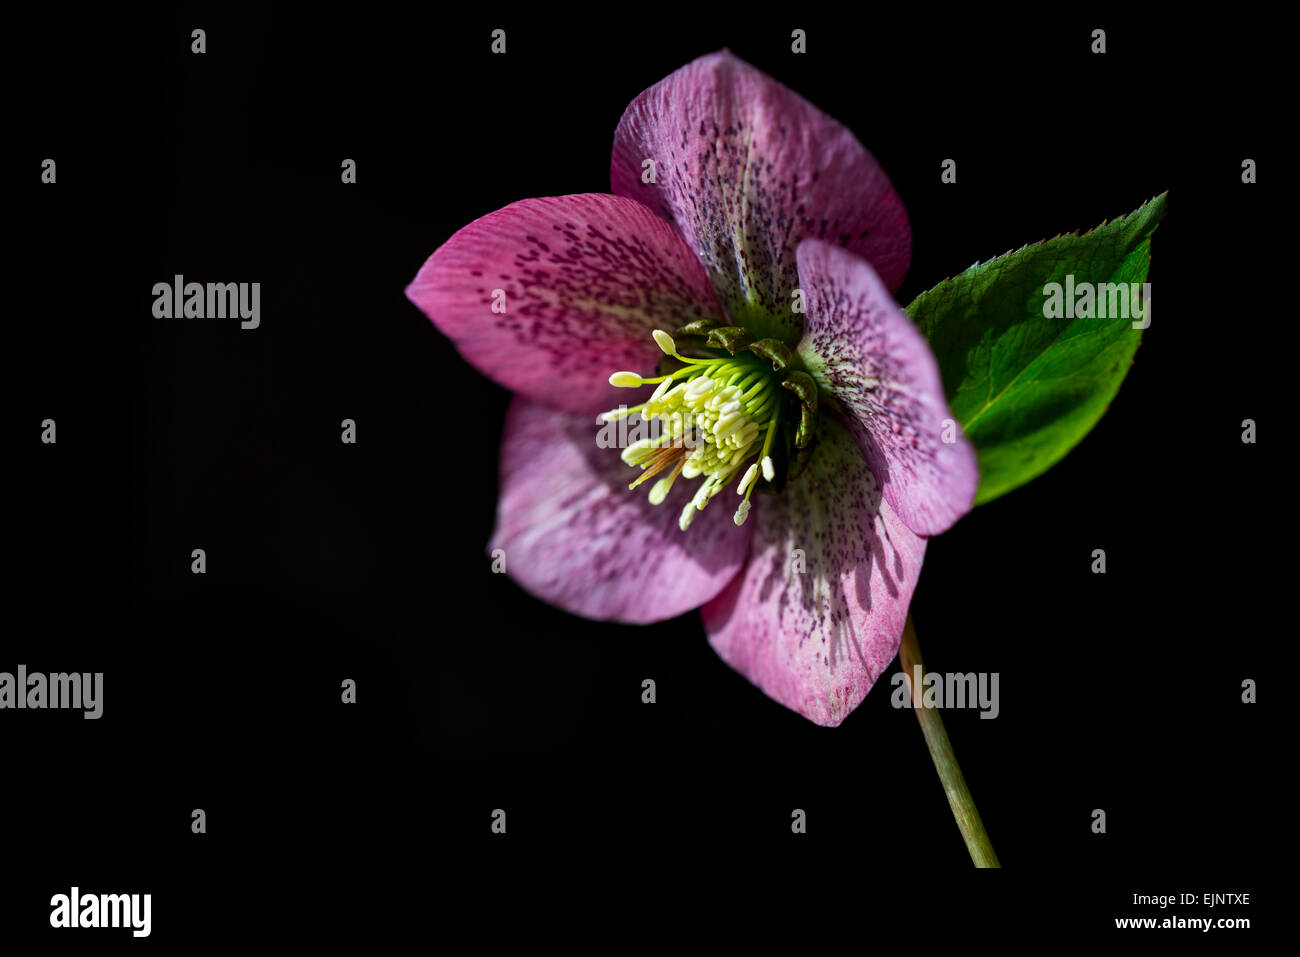 Deep pink/red Helleborus Orientalis with spotted petals. Natural light and a dark background. Stock Photo